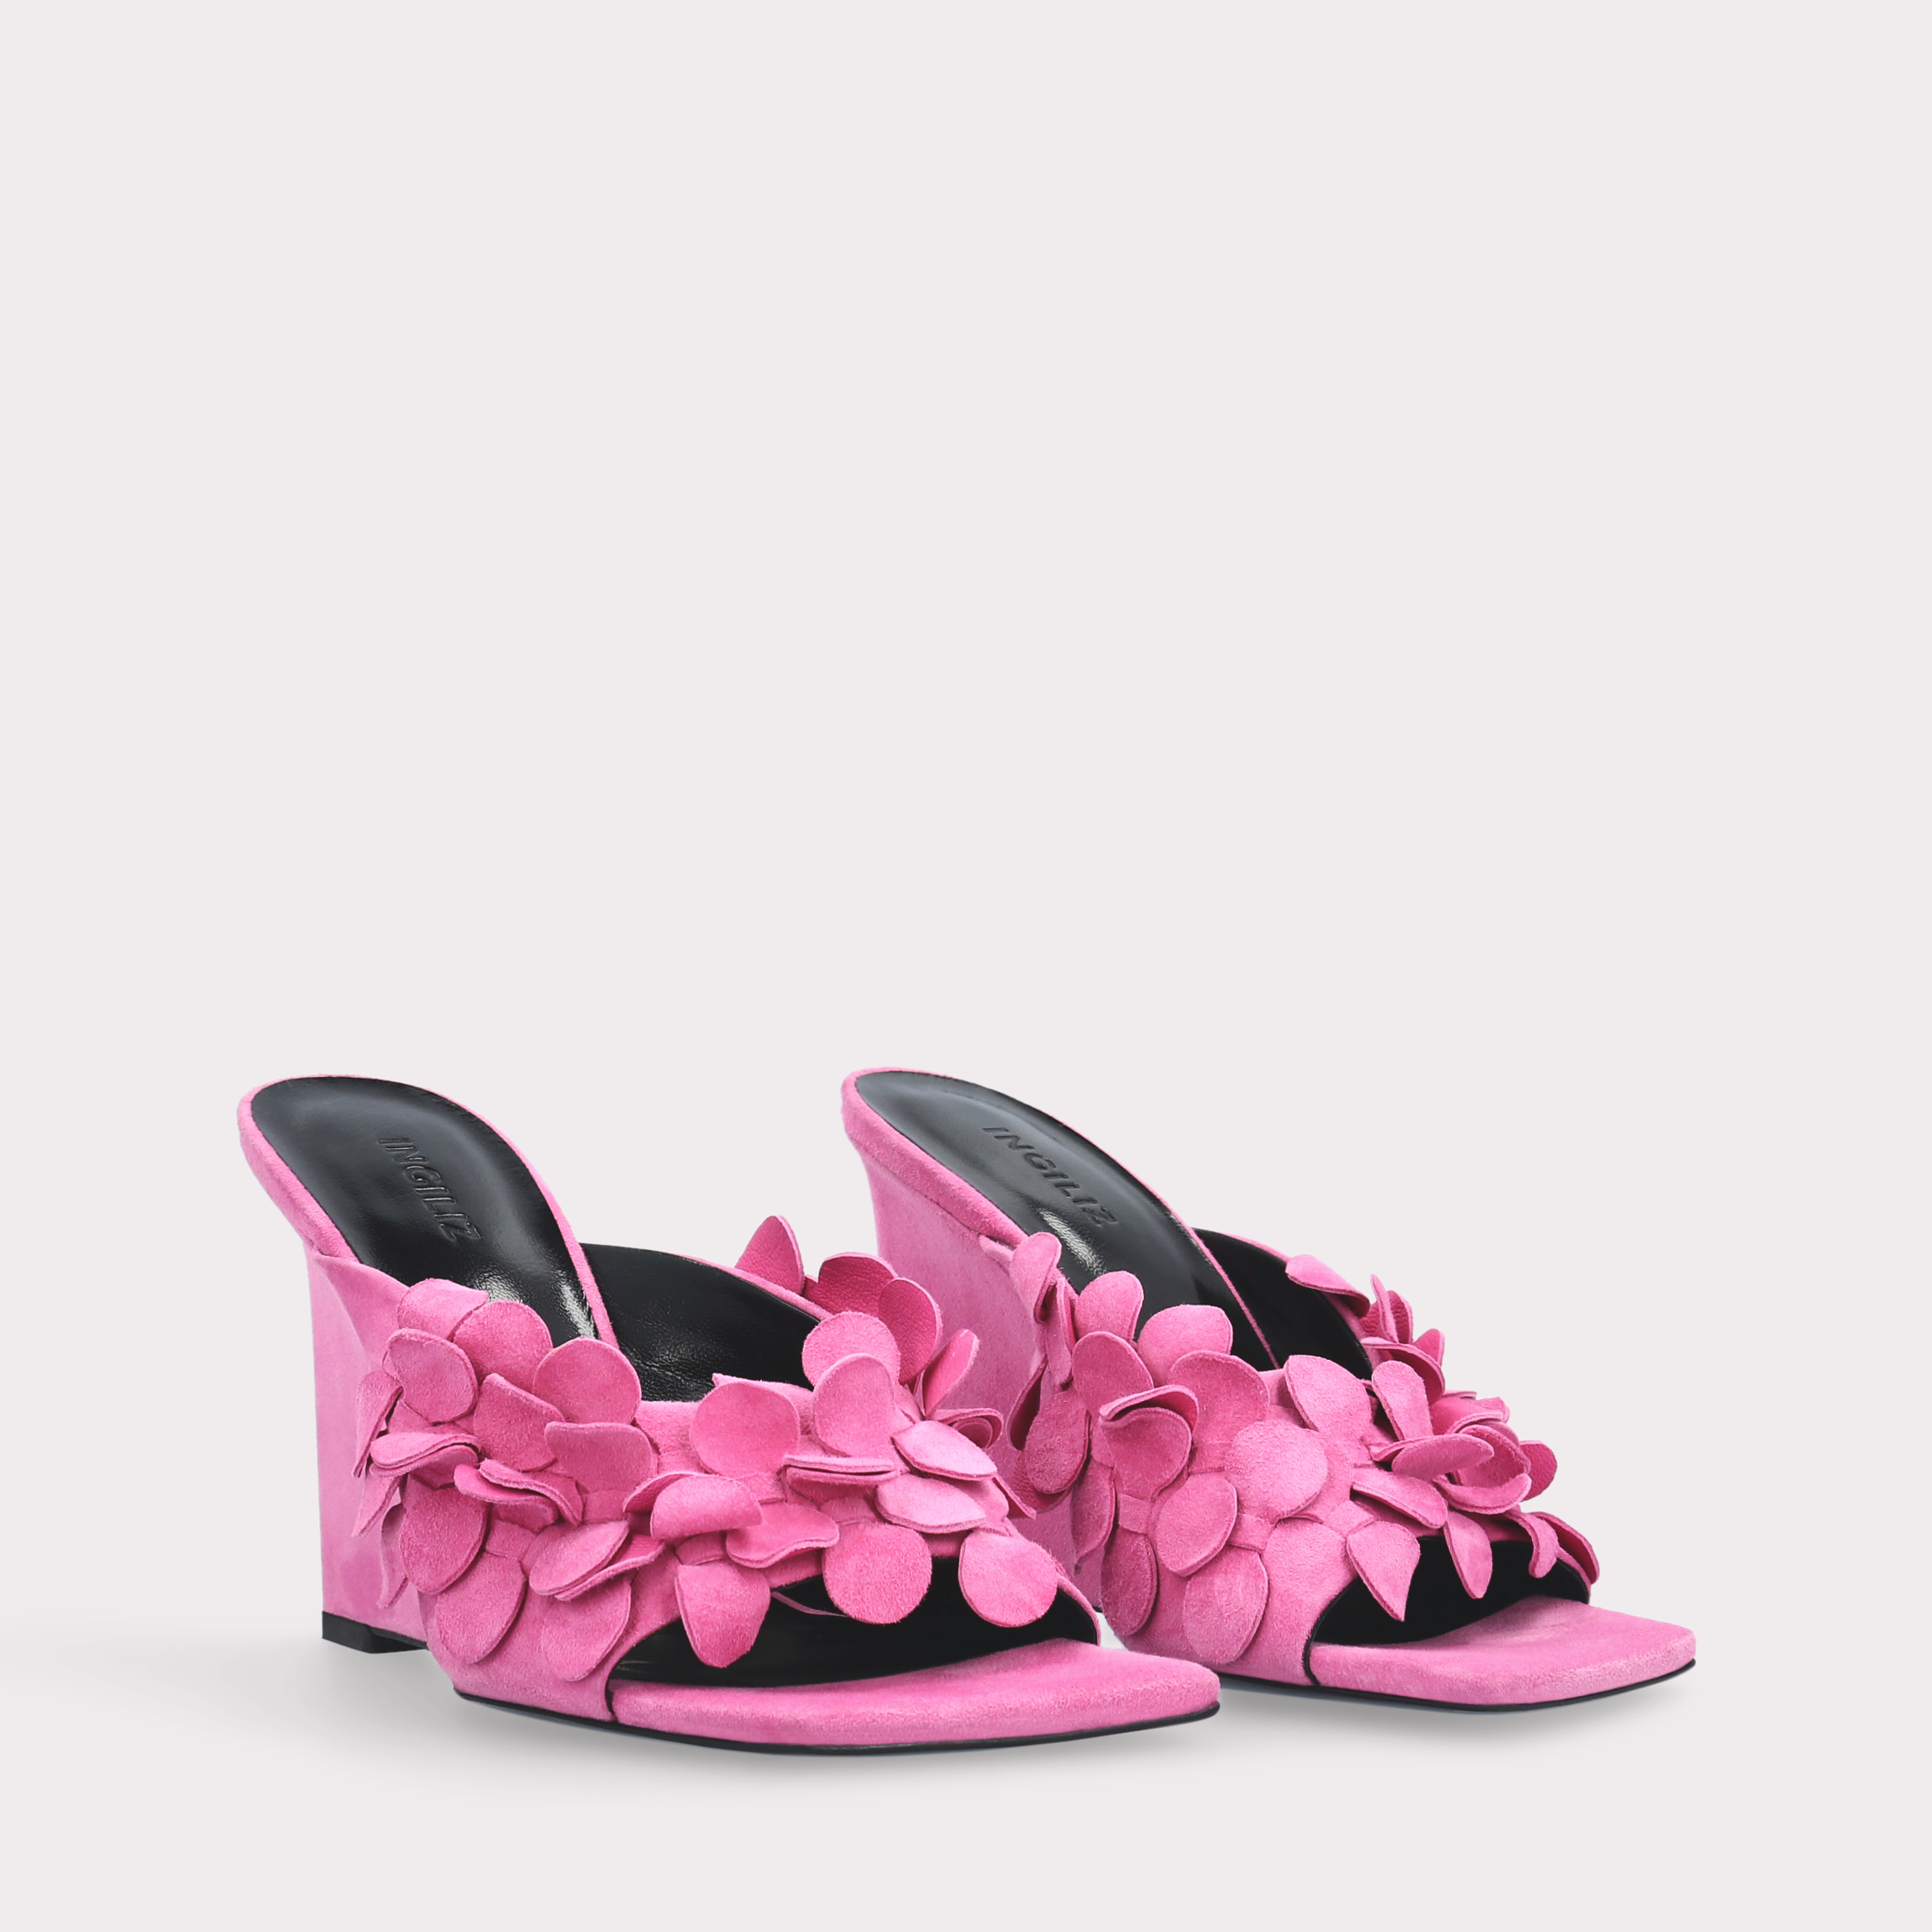 ZILLY 01 FUCHSIA SUEDE LEATHER MULES